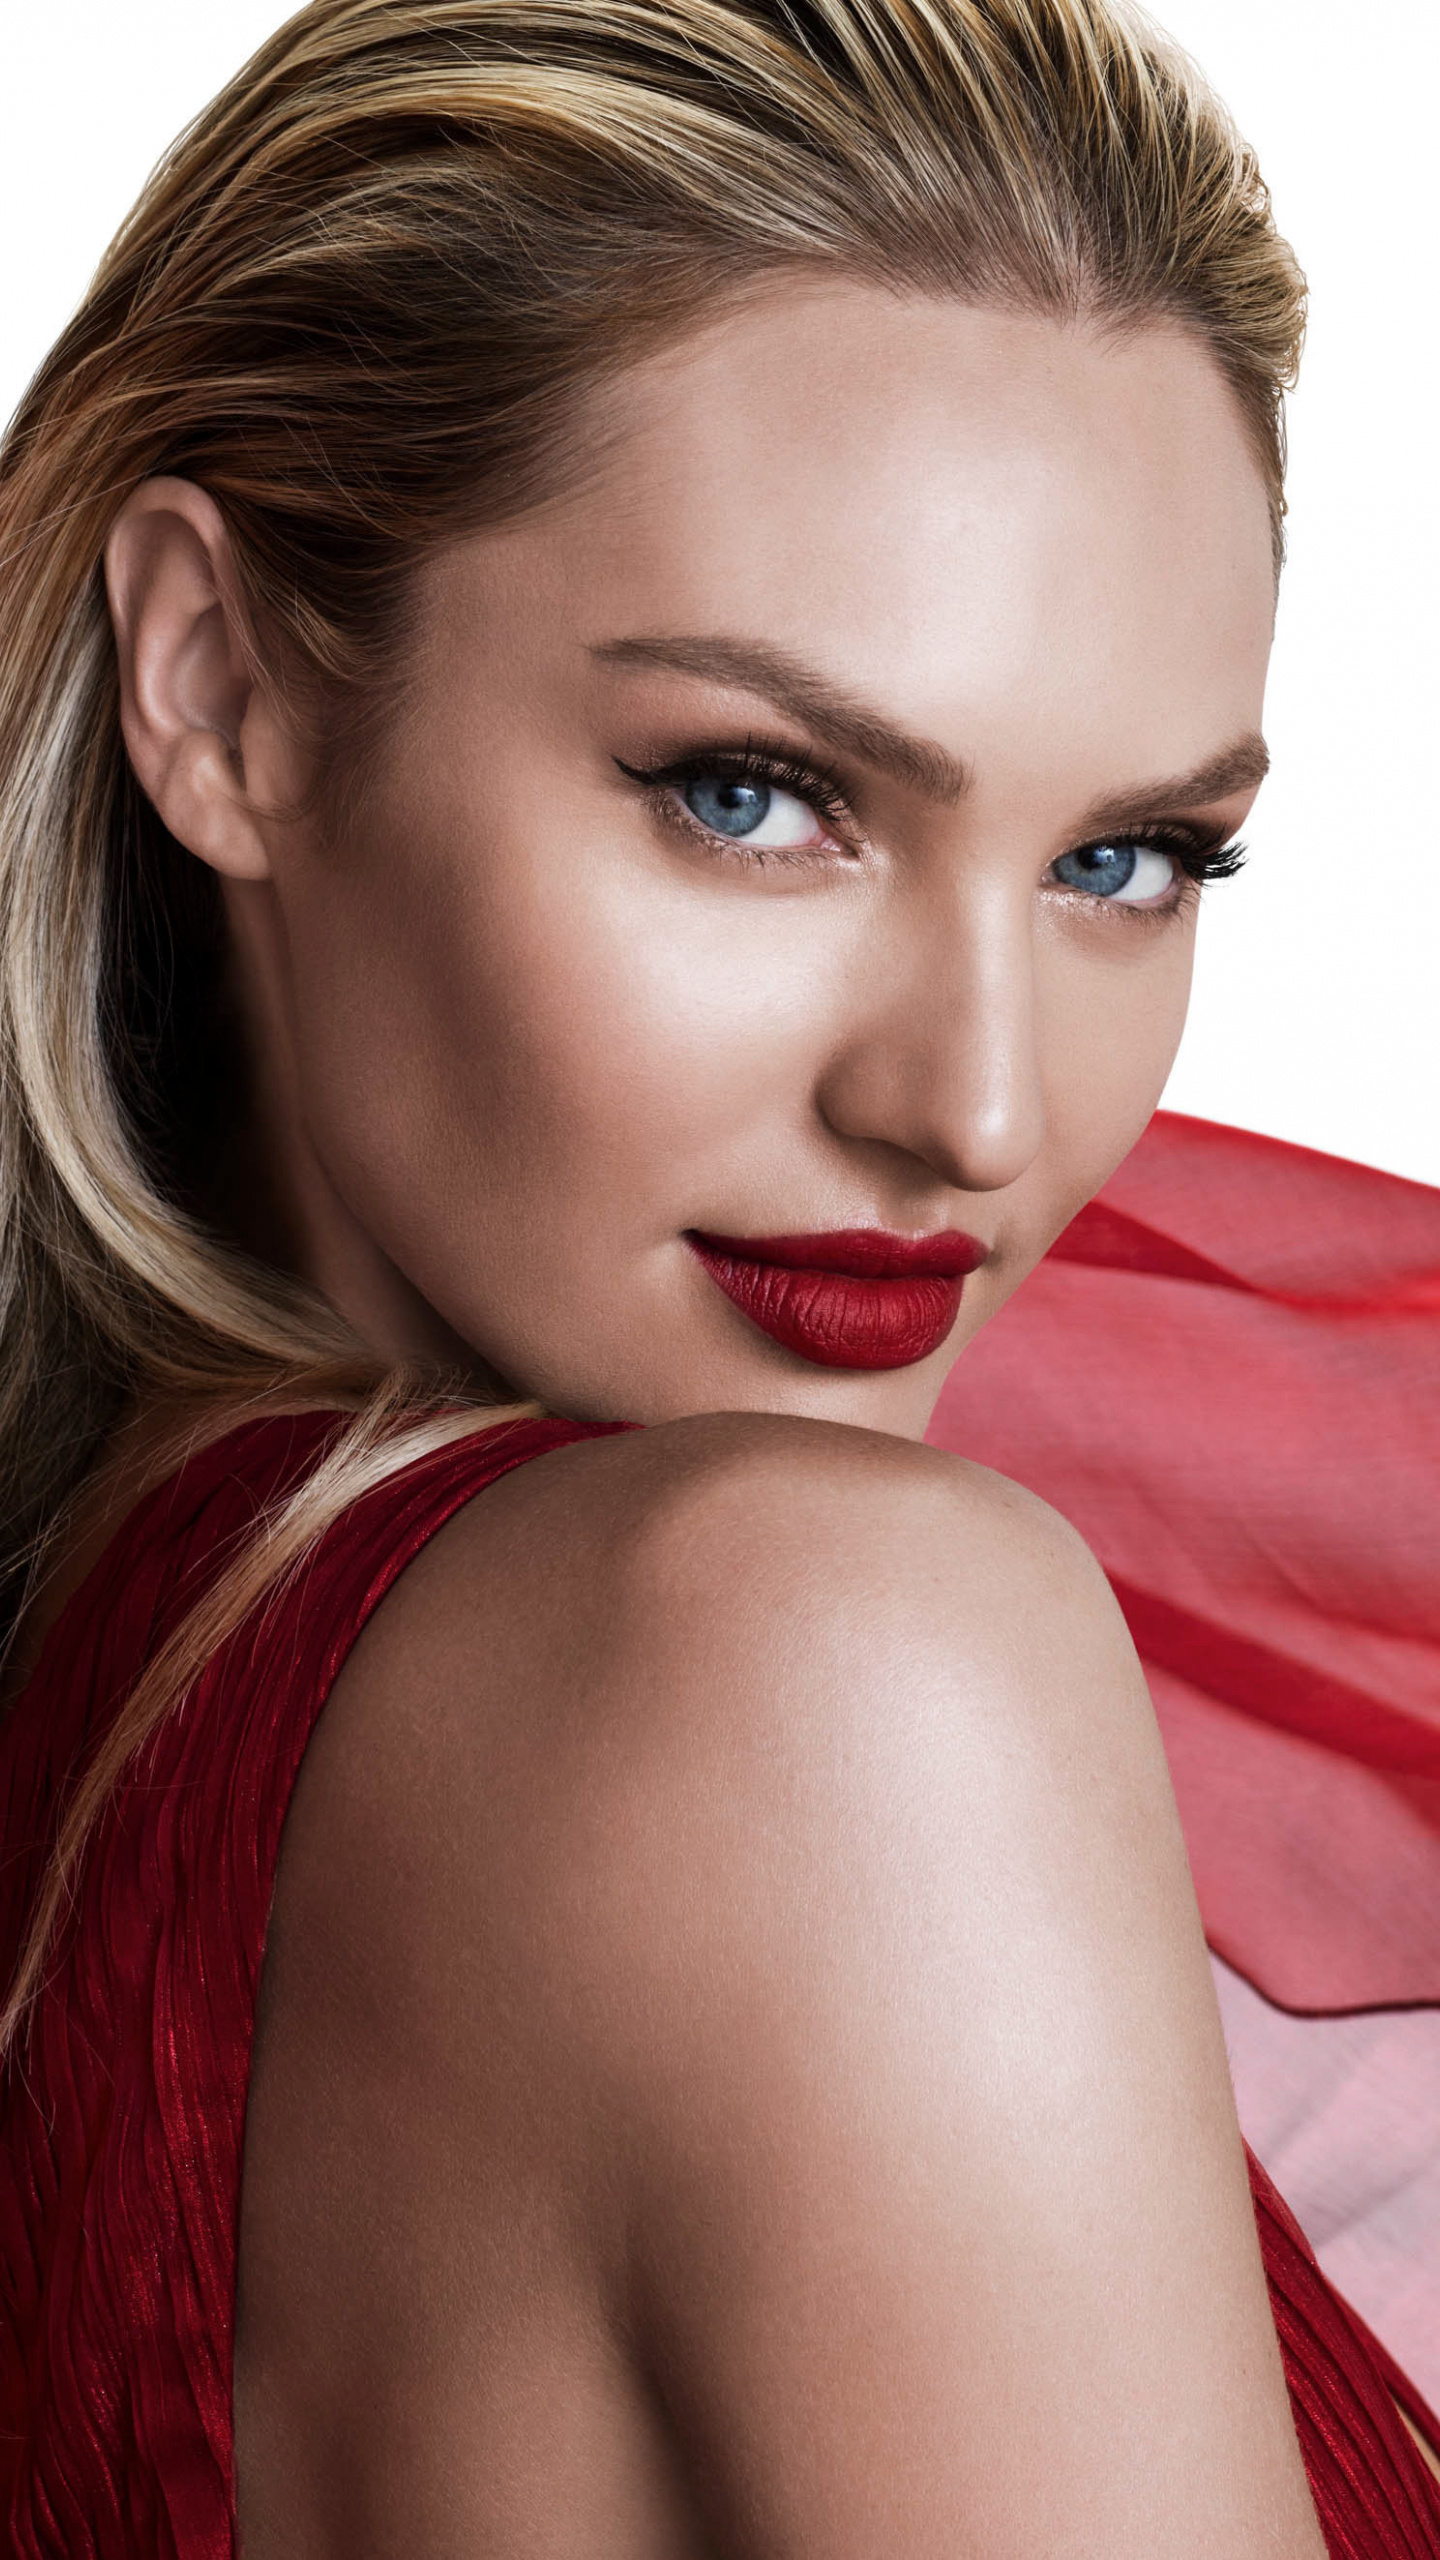 Candice Swanepoel, Supermodel wallpaper, HD image, Stunning background, 1440x2560 HD Phone